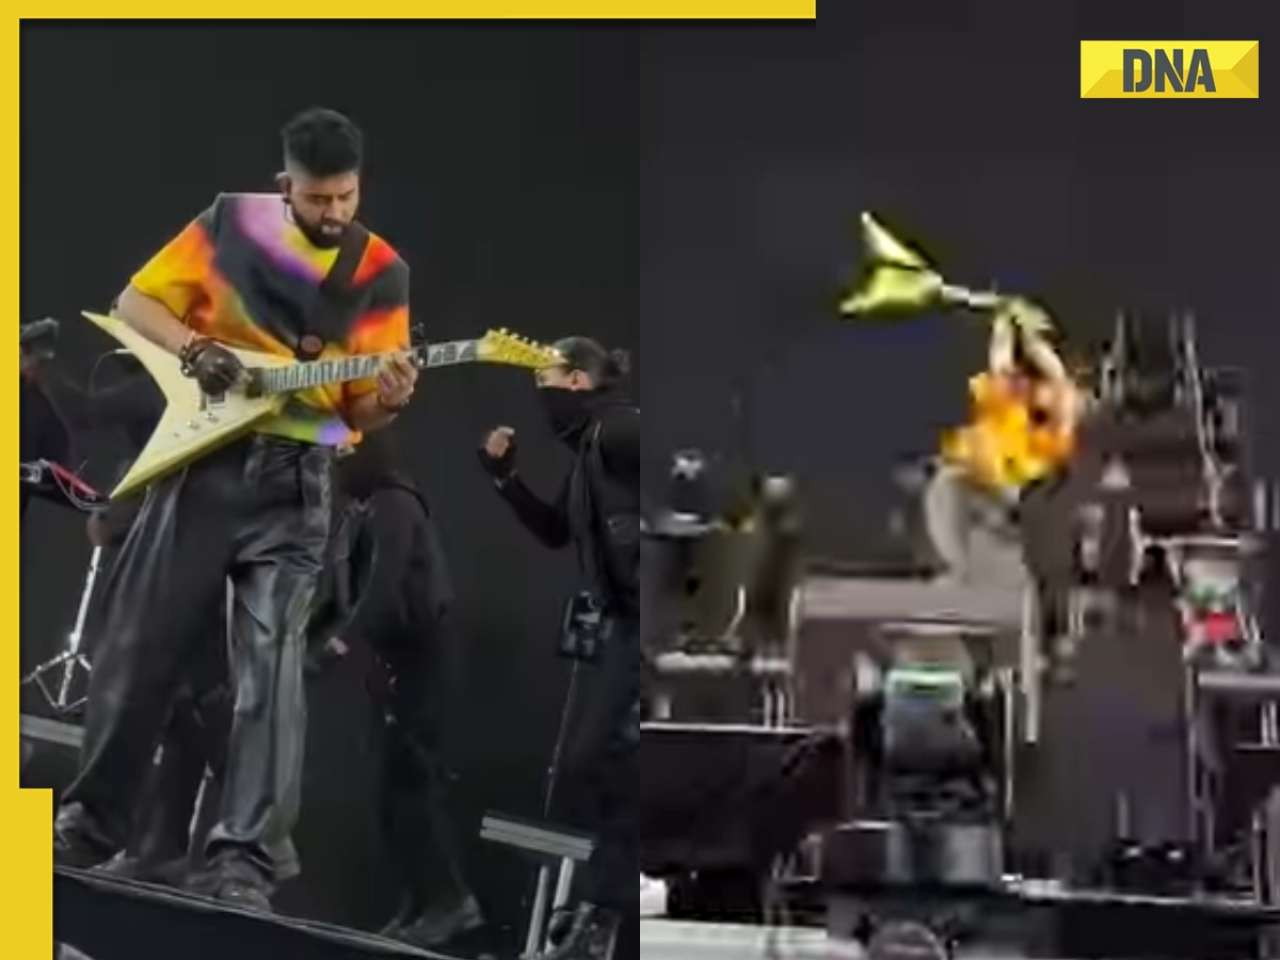 'Ban gaya cool?': AP Dhillon slammed for breaking guitar on stage during live performance at Coachella